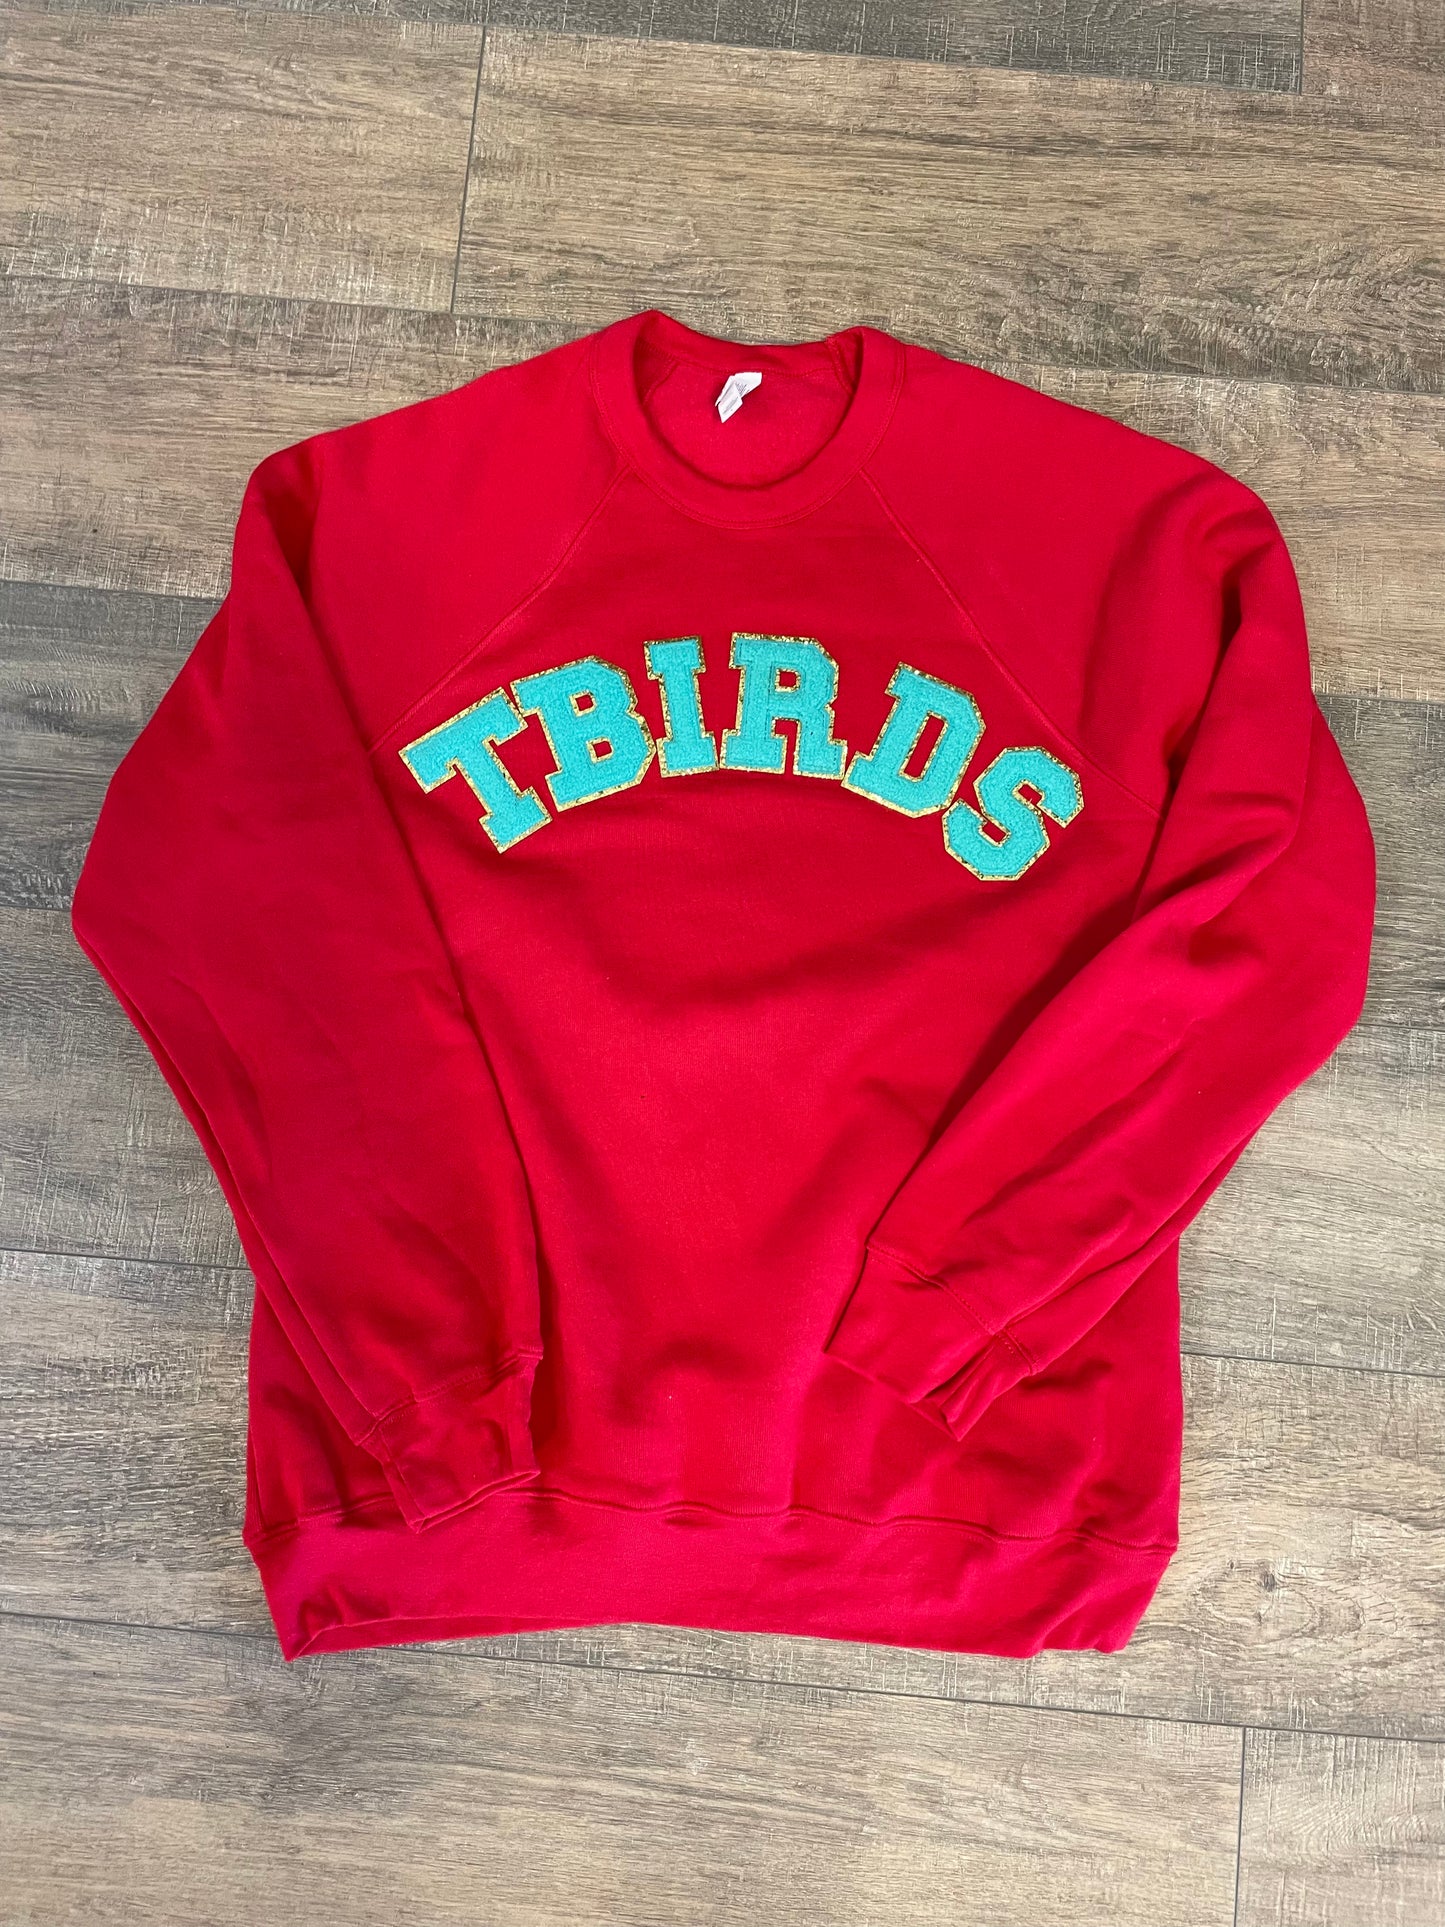 TBIRDS Patch Sweatshirt - Teal Patches